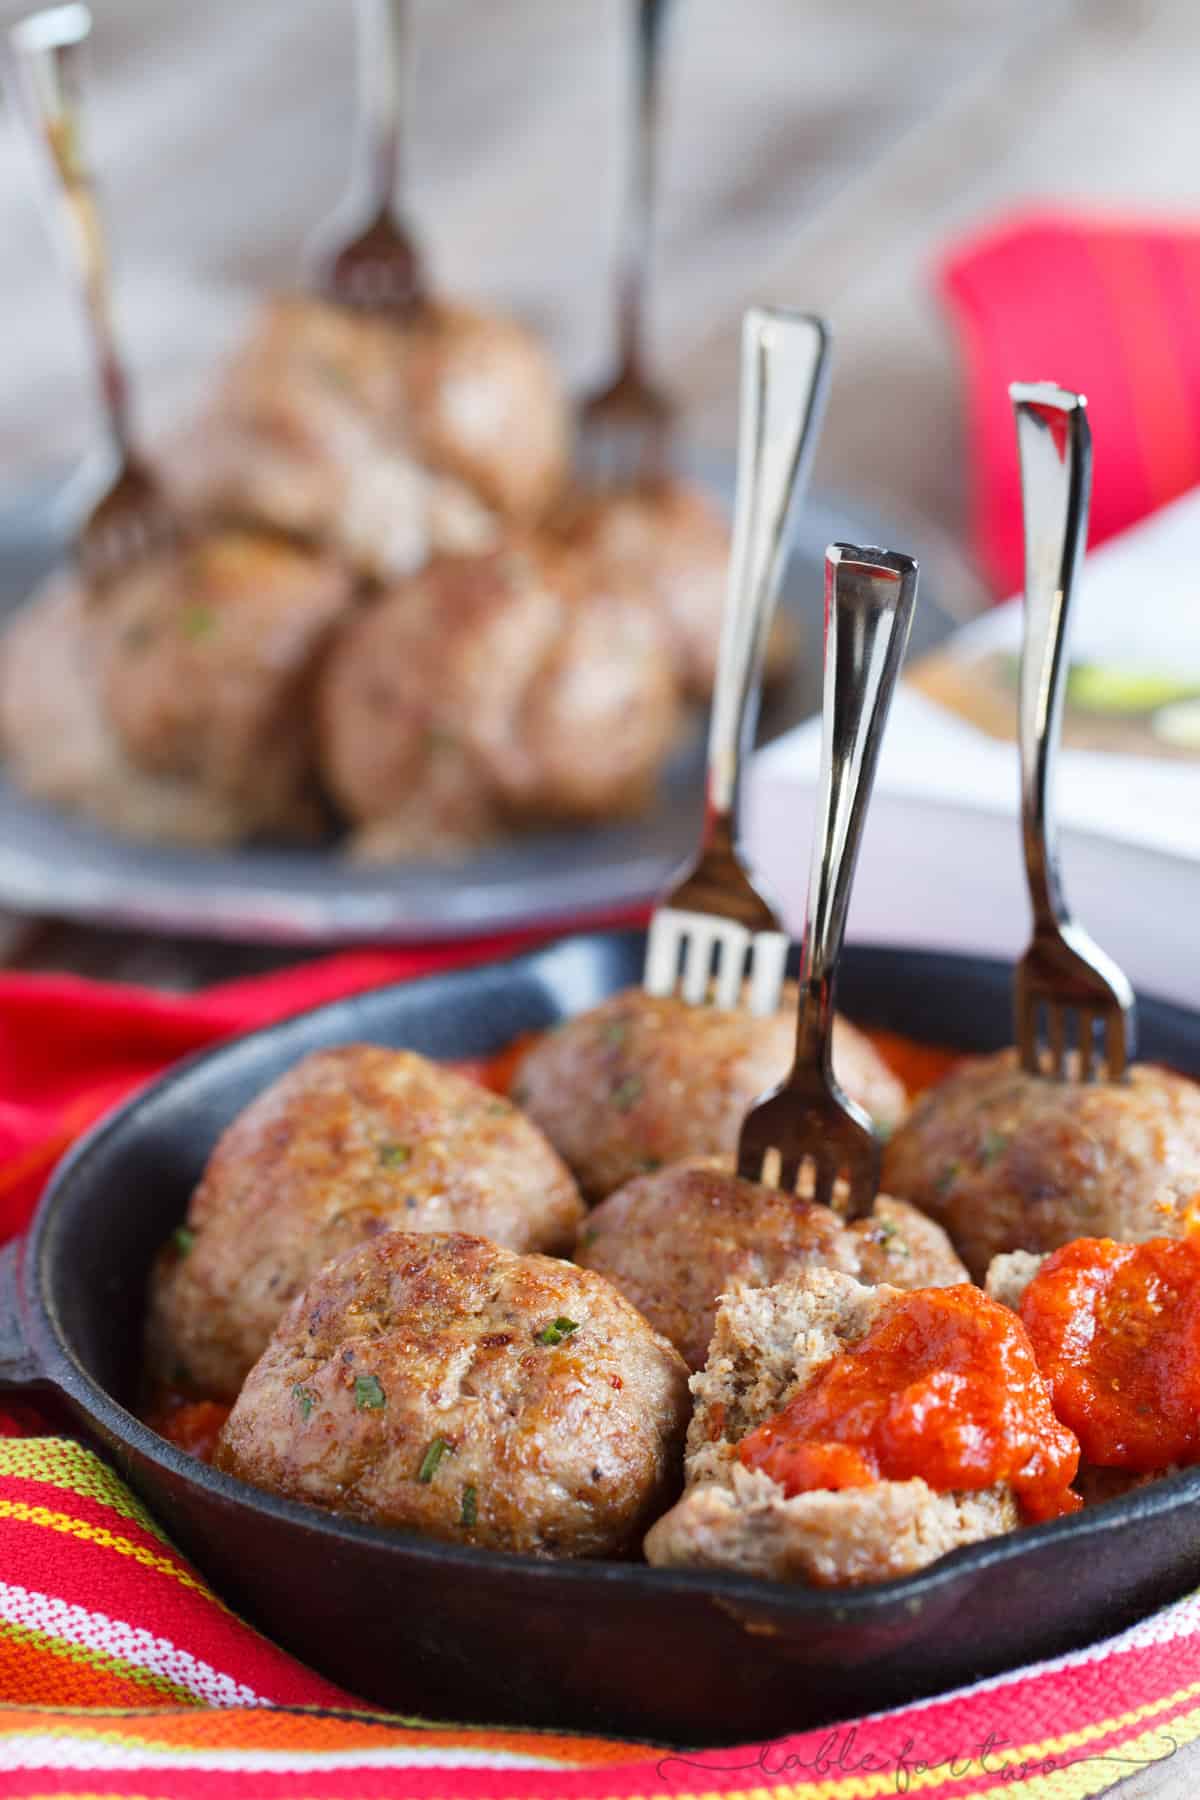 Mexican meatballs are a fun and inexpensive appetizer to throw together in a pinch! Super flavorful and fun little bites that can be served with salsa or guacamole!